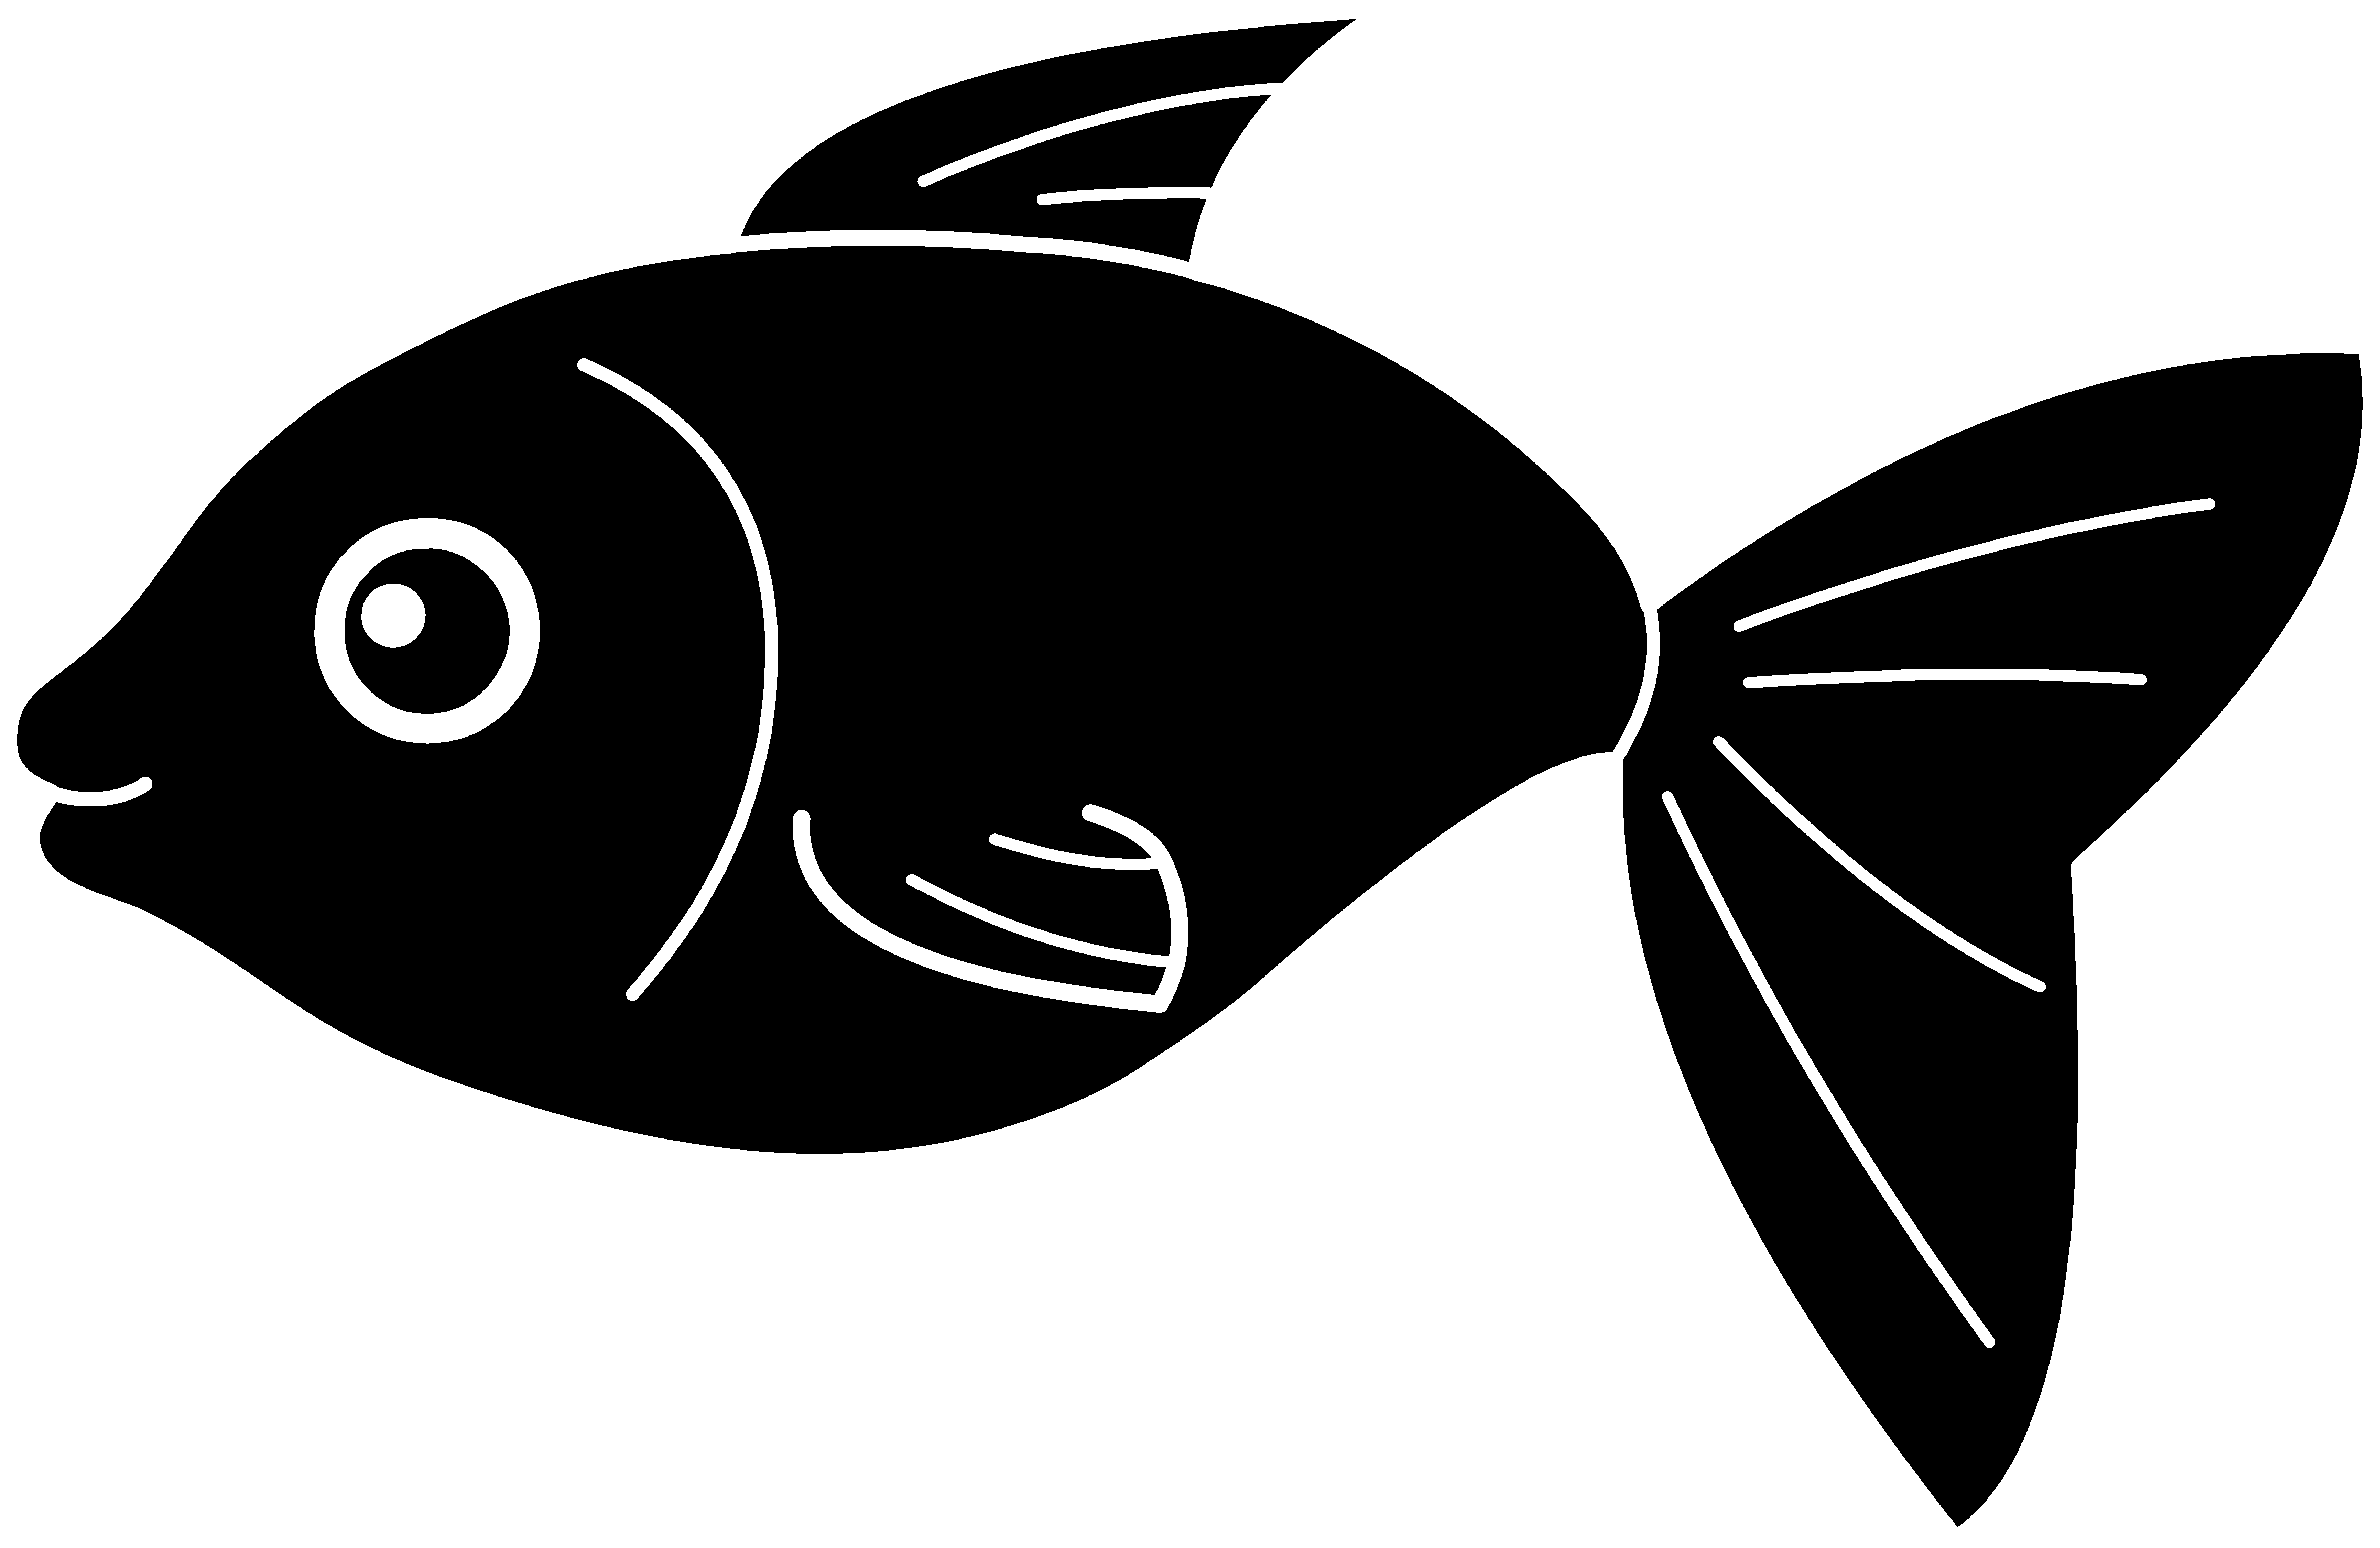 Free Fish Silhouette, Download Free Clip Art, Free Clip Art on.